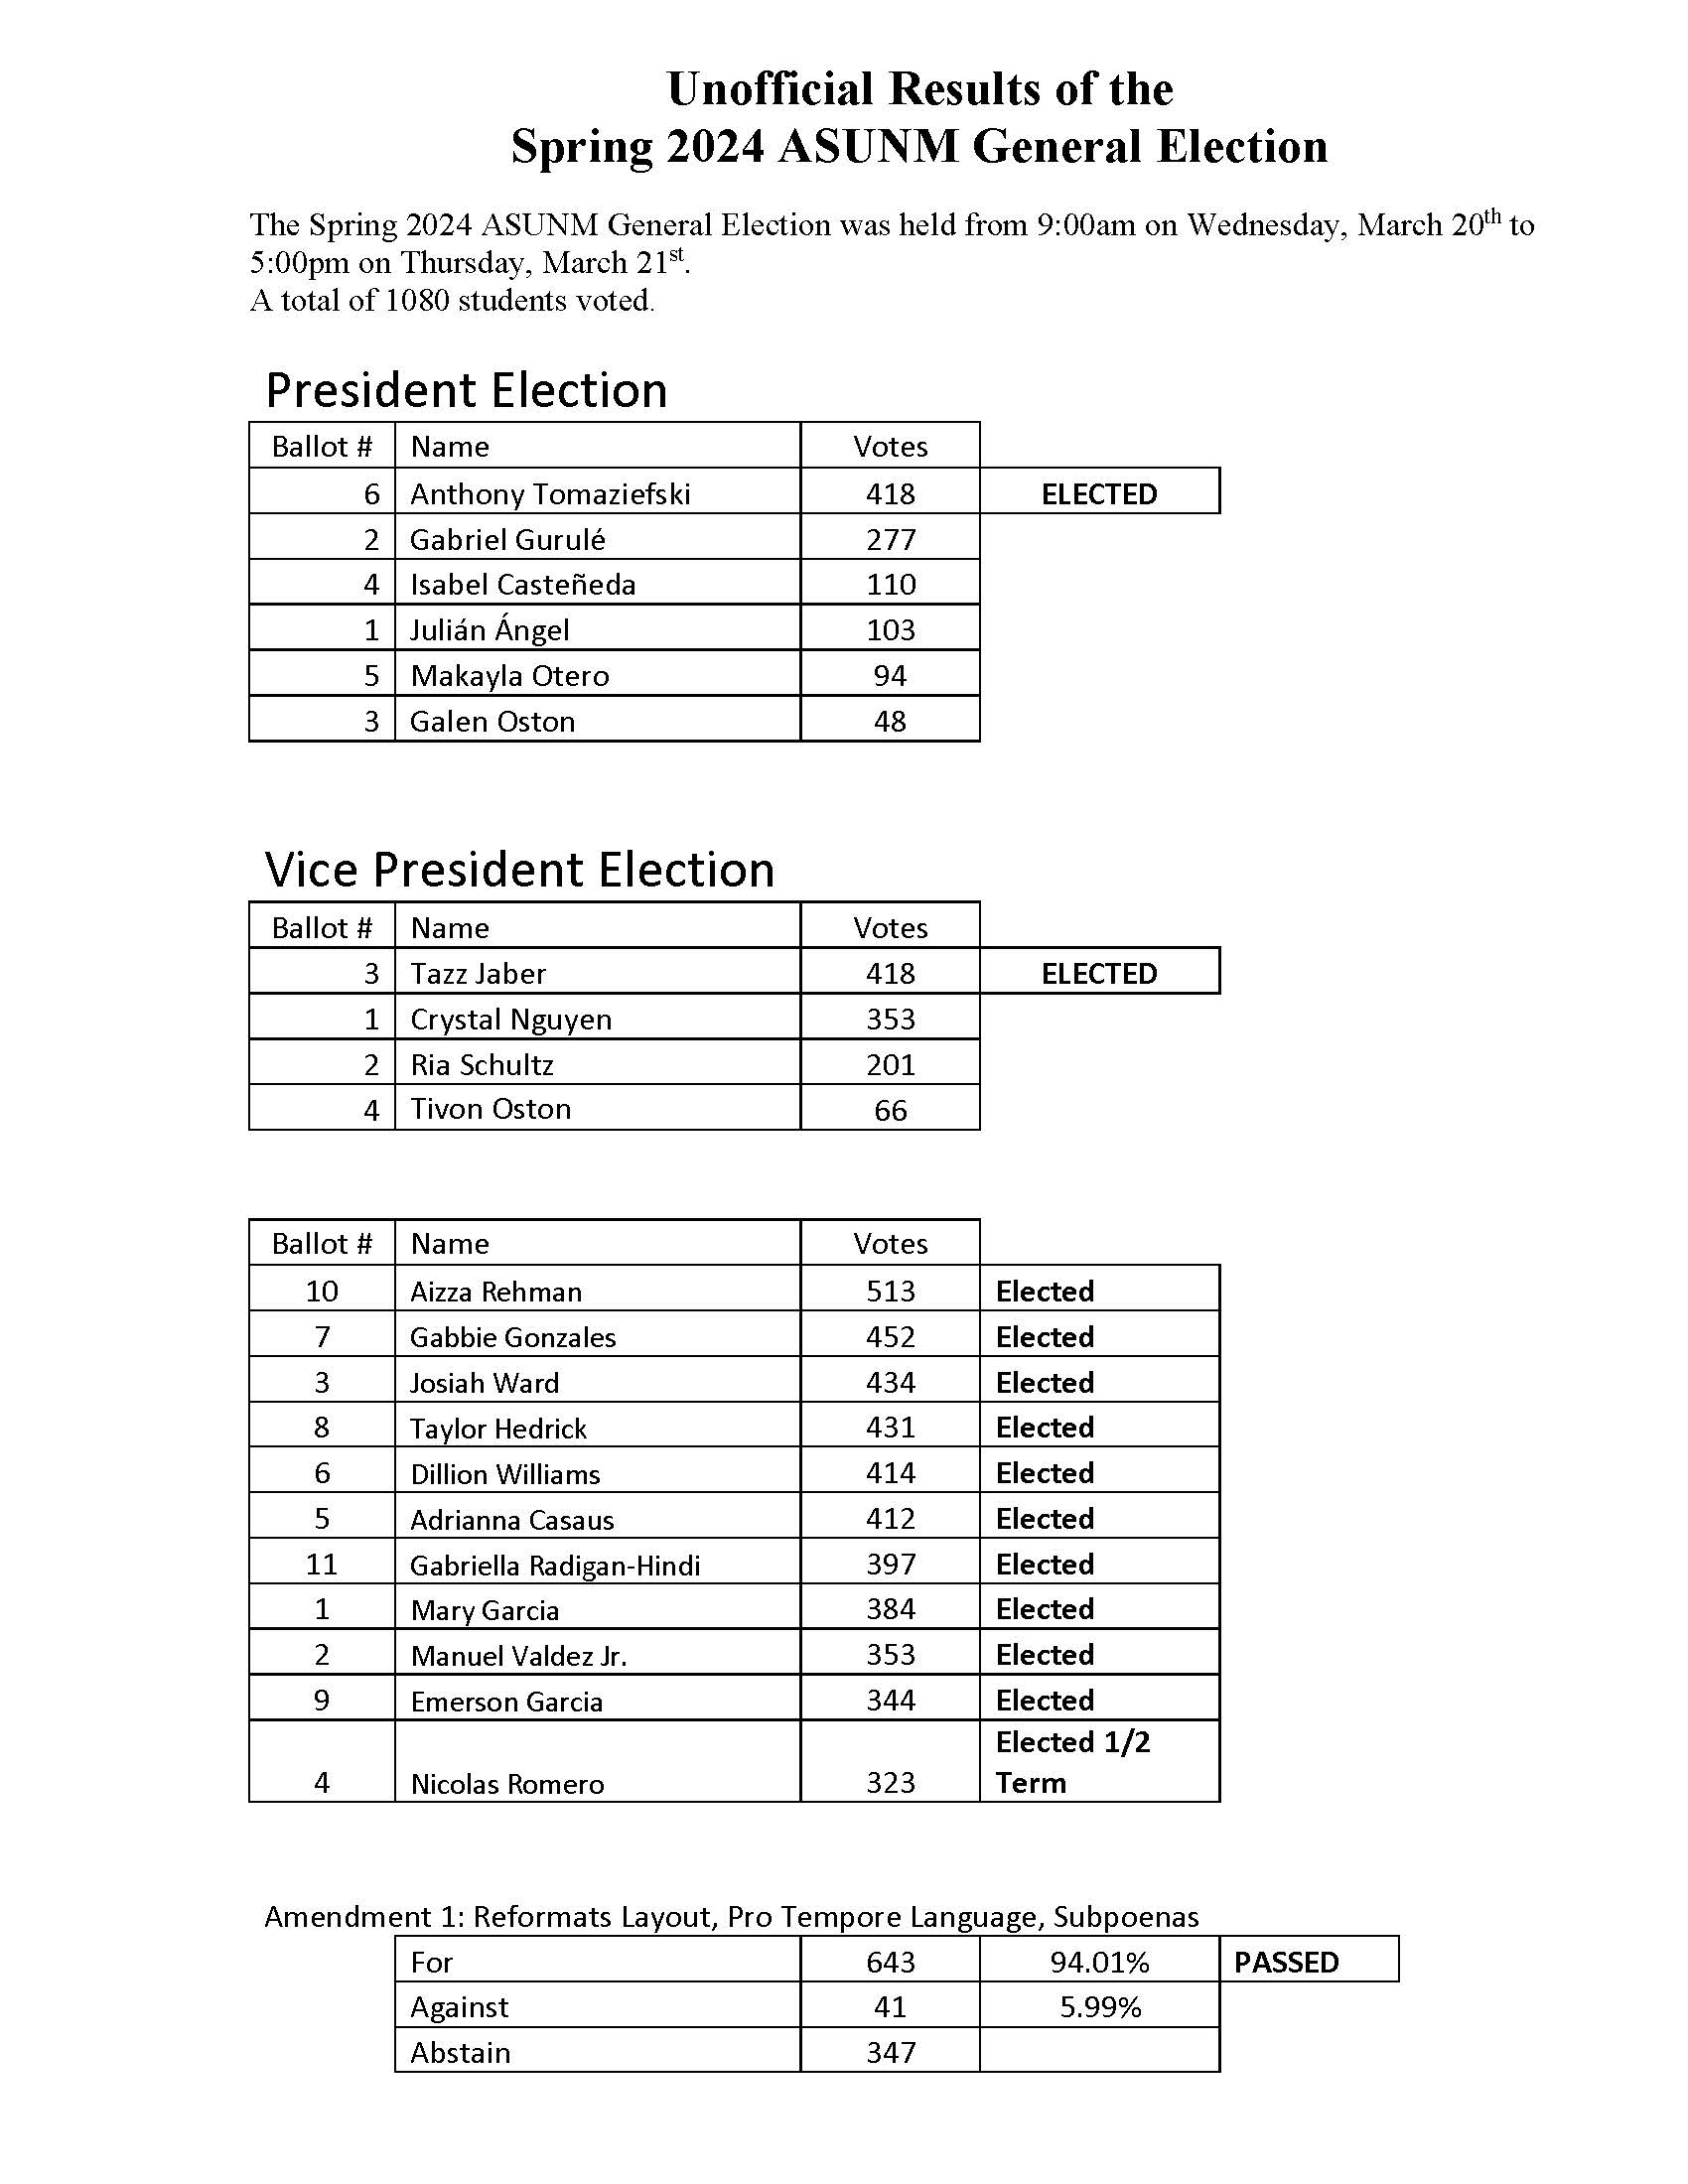 Spring 2024 Election Results